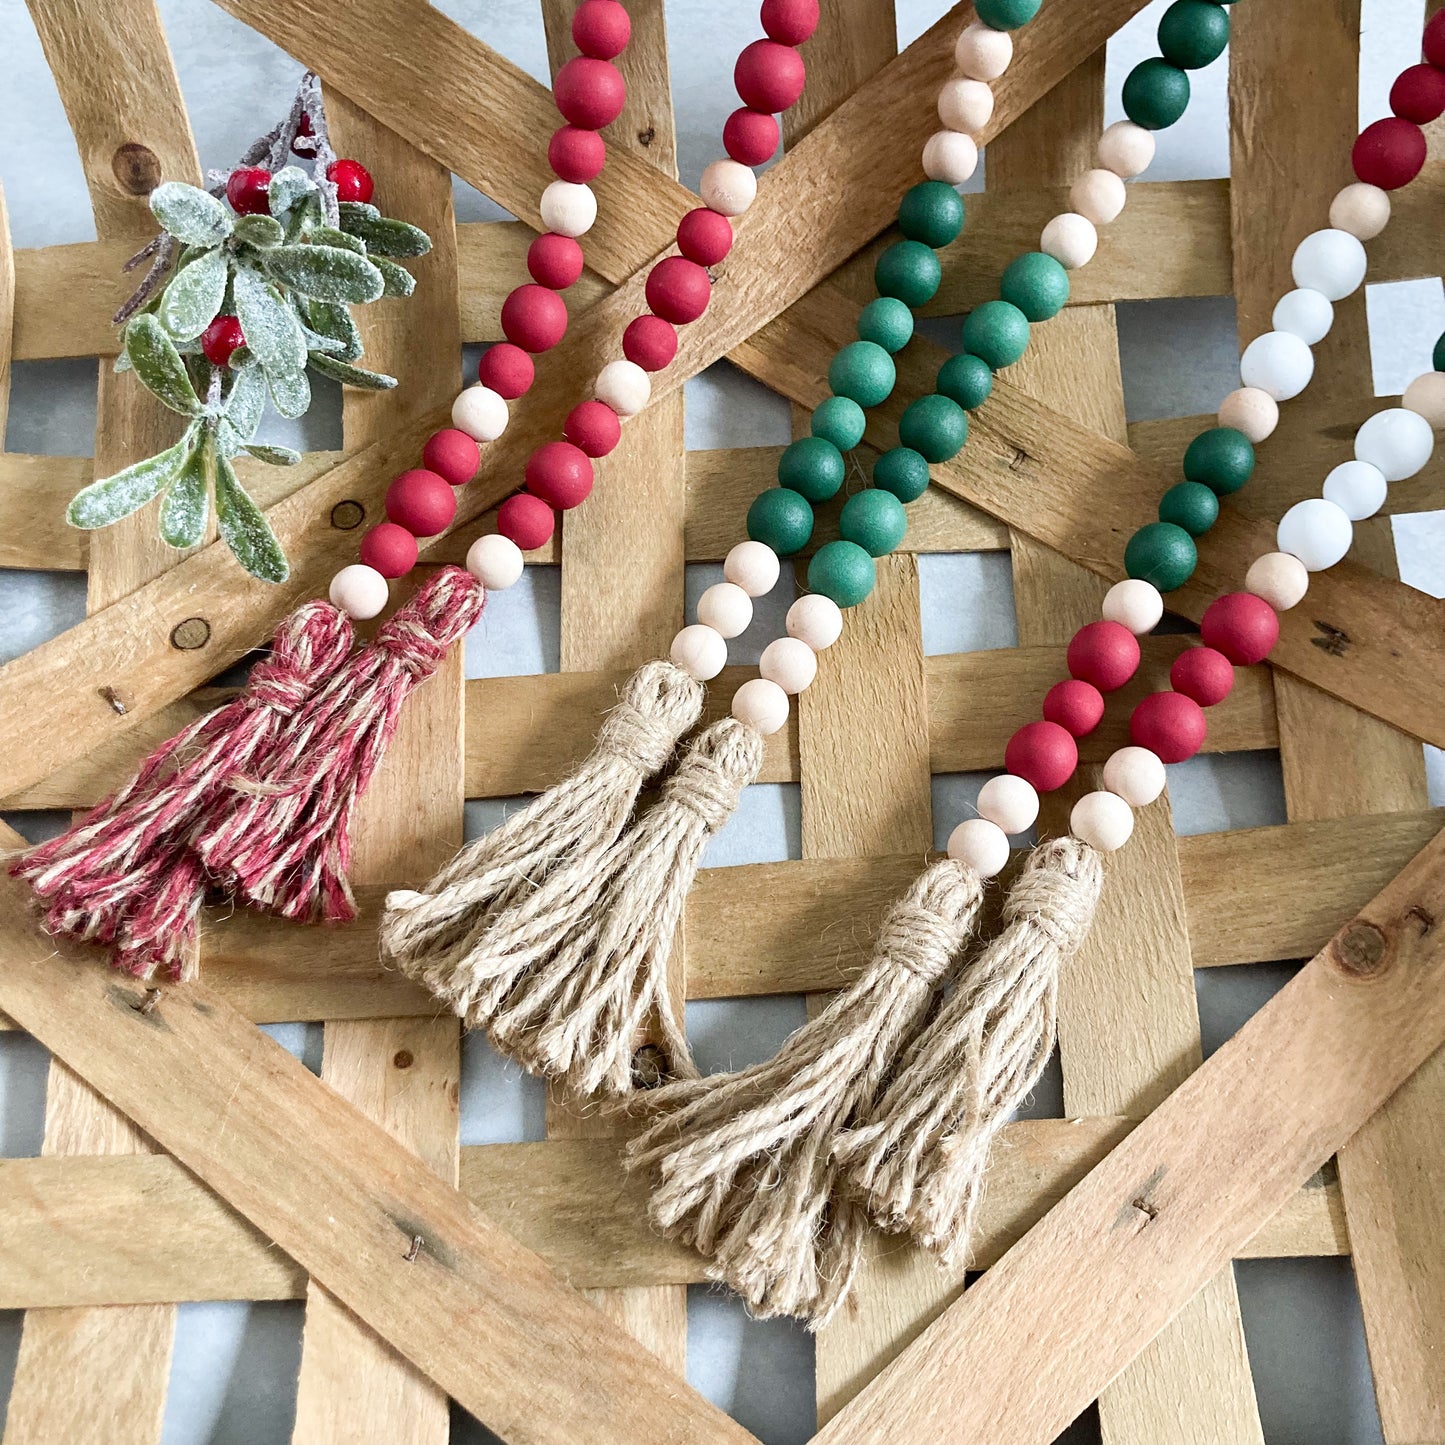 30 inch farmhouse style wood bead garland coming in a variety of colors including red, green, and multicolored